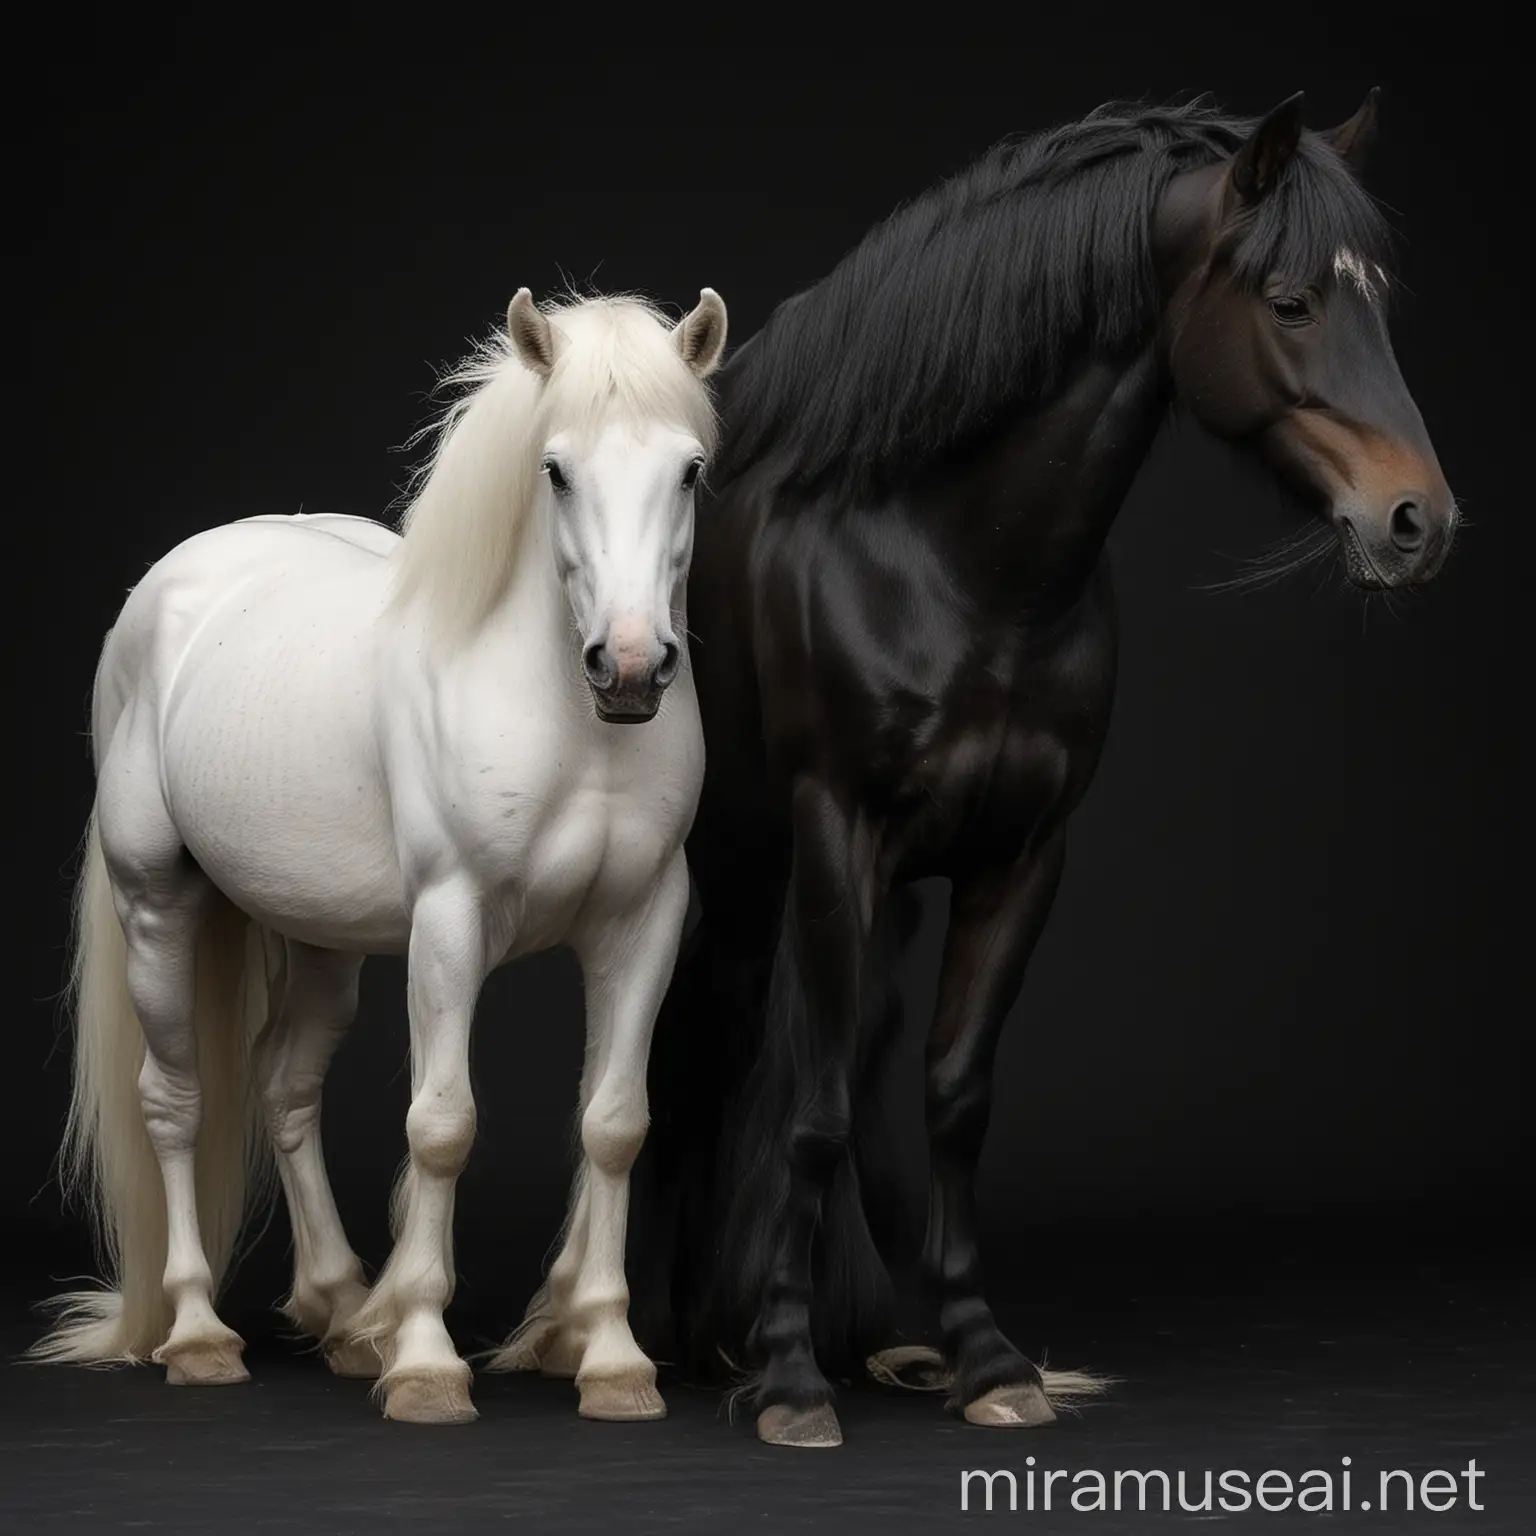 2 black horses and The hair neck and tail is white with black background
same as the attached image